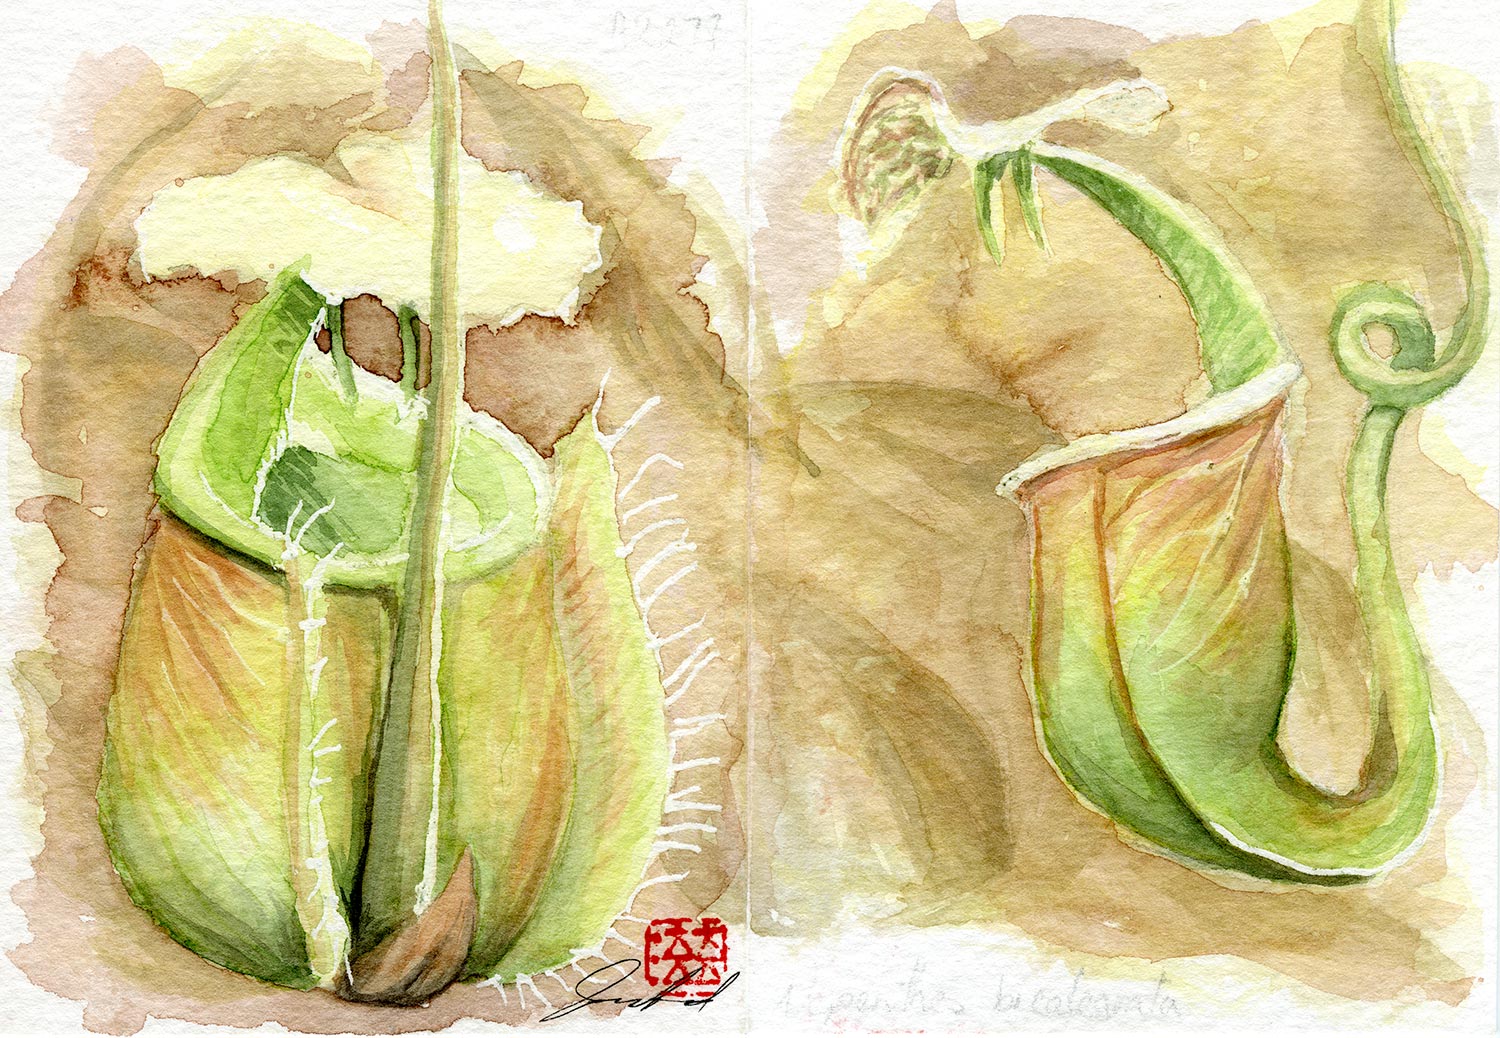 Featured image for “Nepenthes Bicalcarata Pitcher Plant”